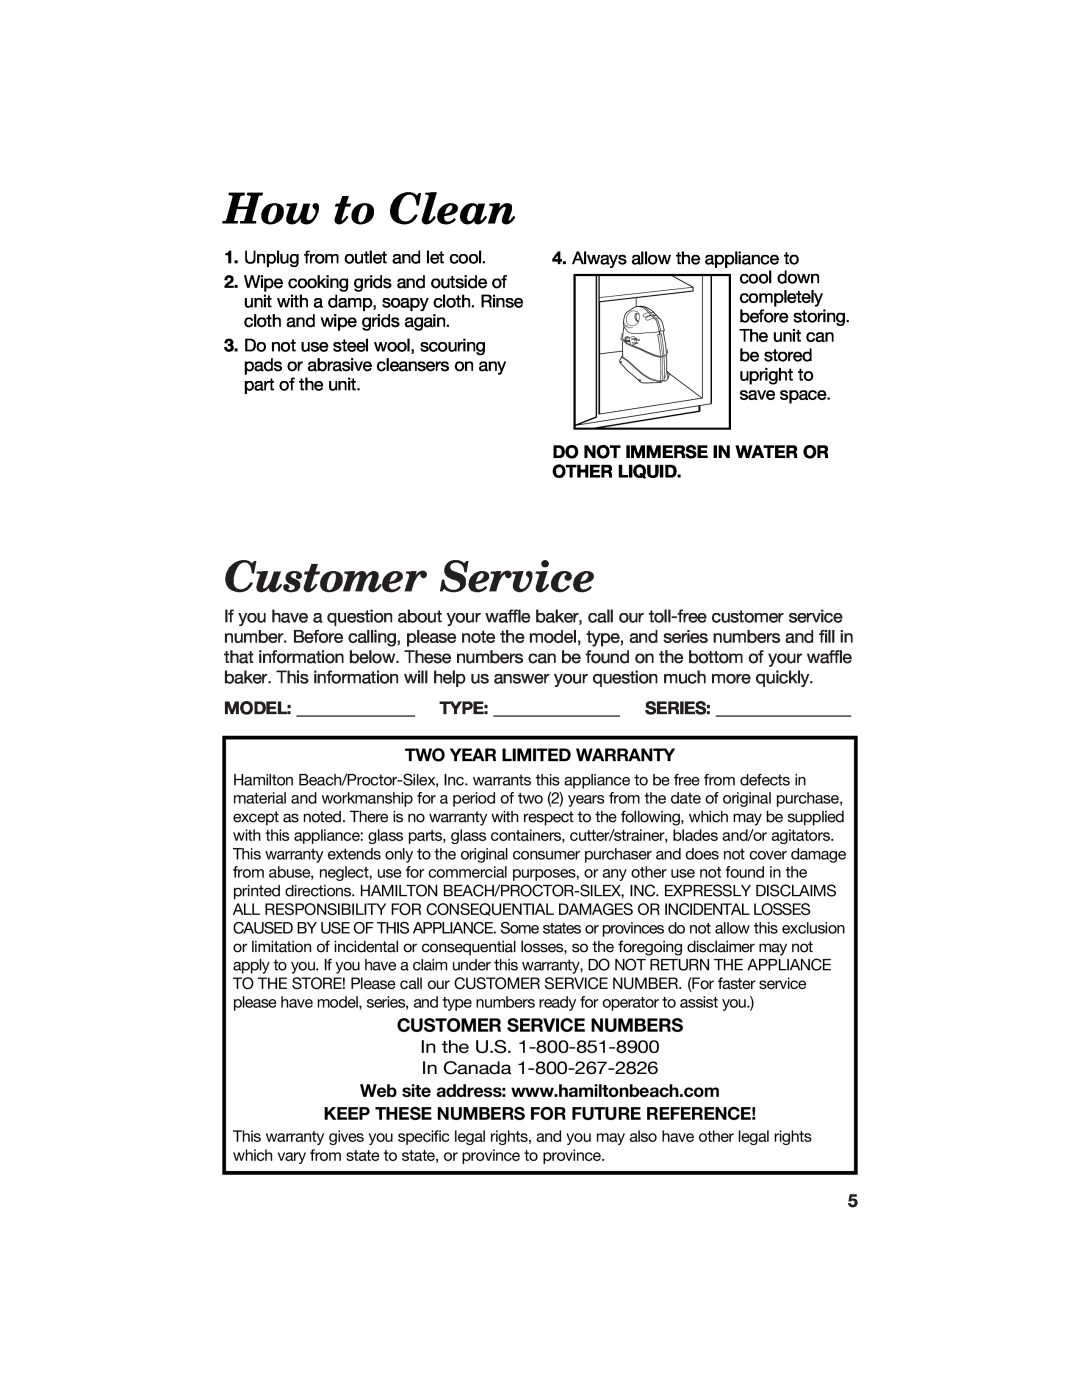 Hamilton Beach 840074500 manual How to Clean, Do Not Immerse In Water Or Other Liquid, Customer Service Numbers 